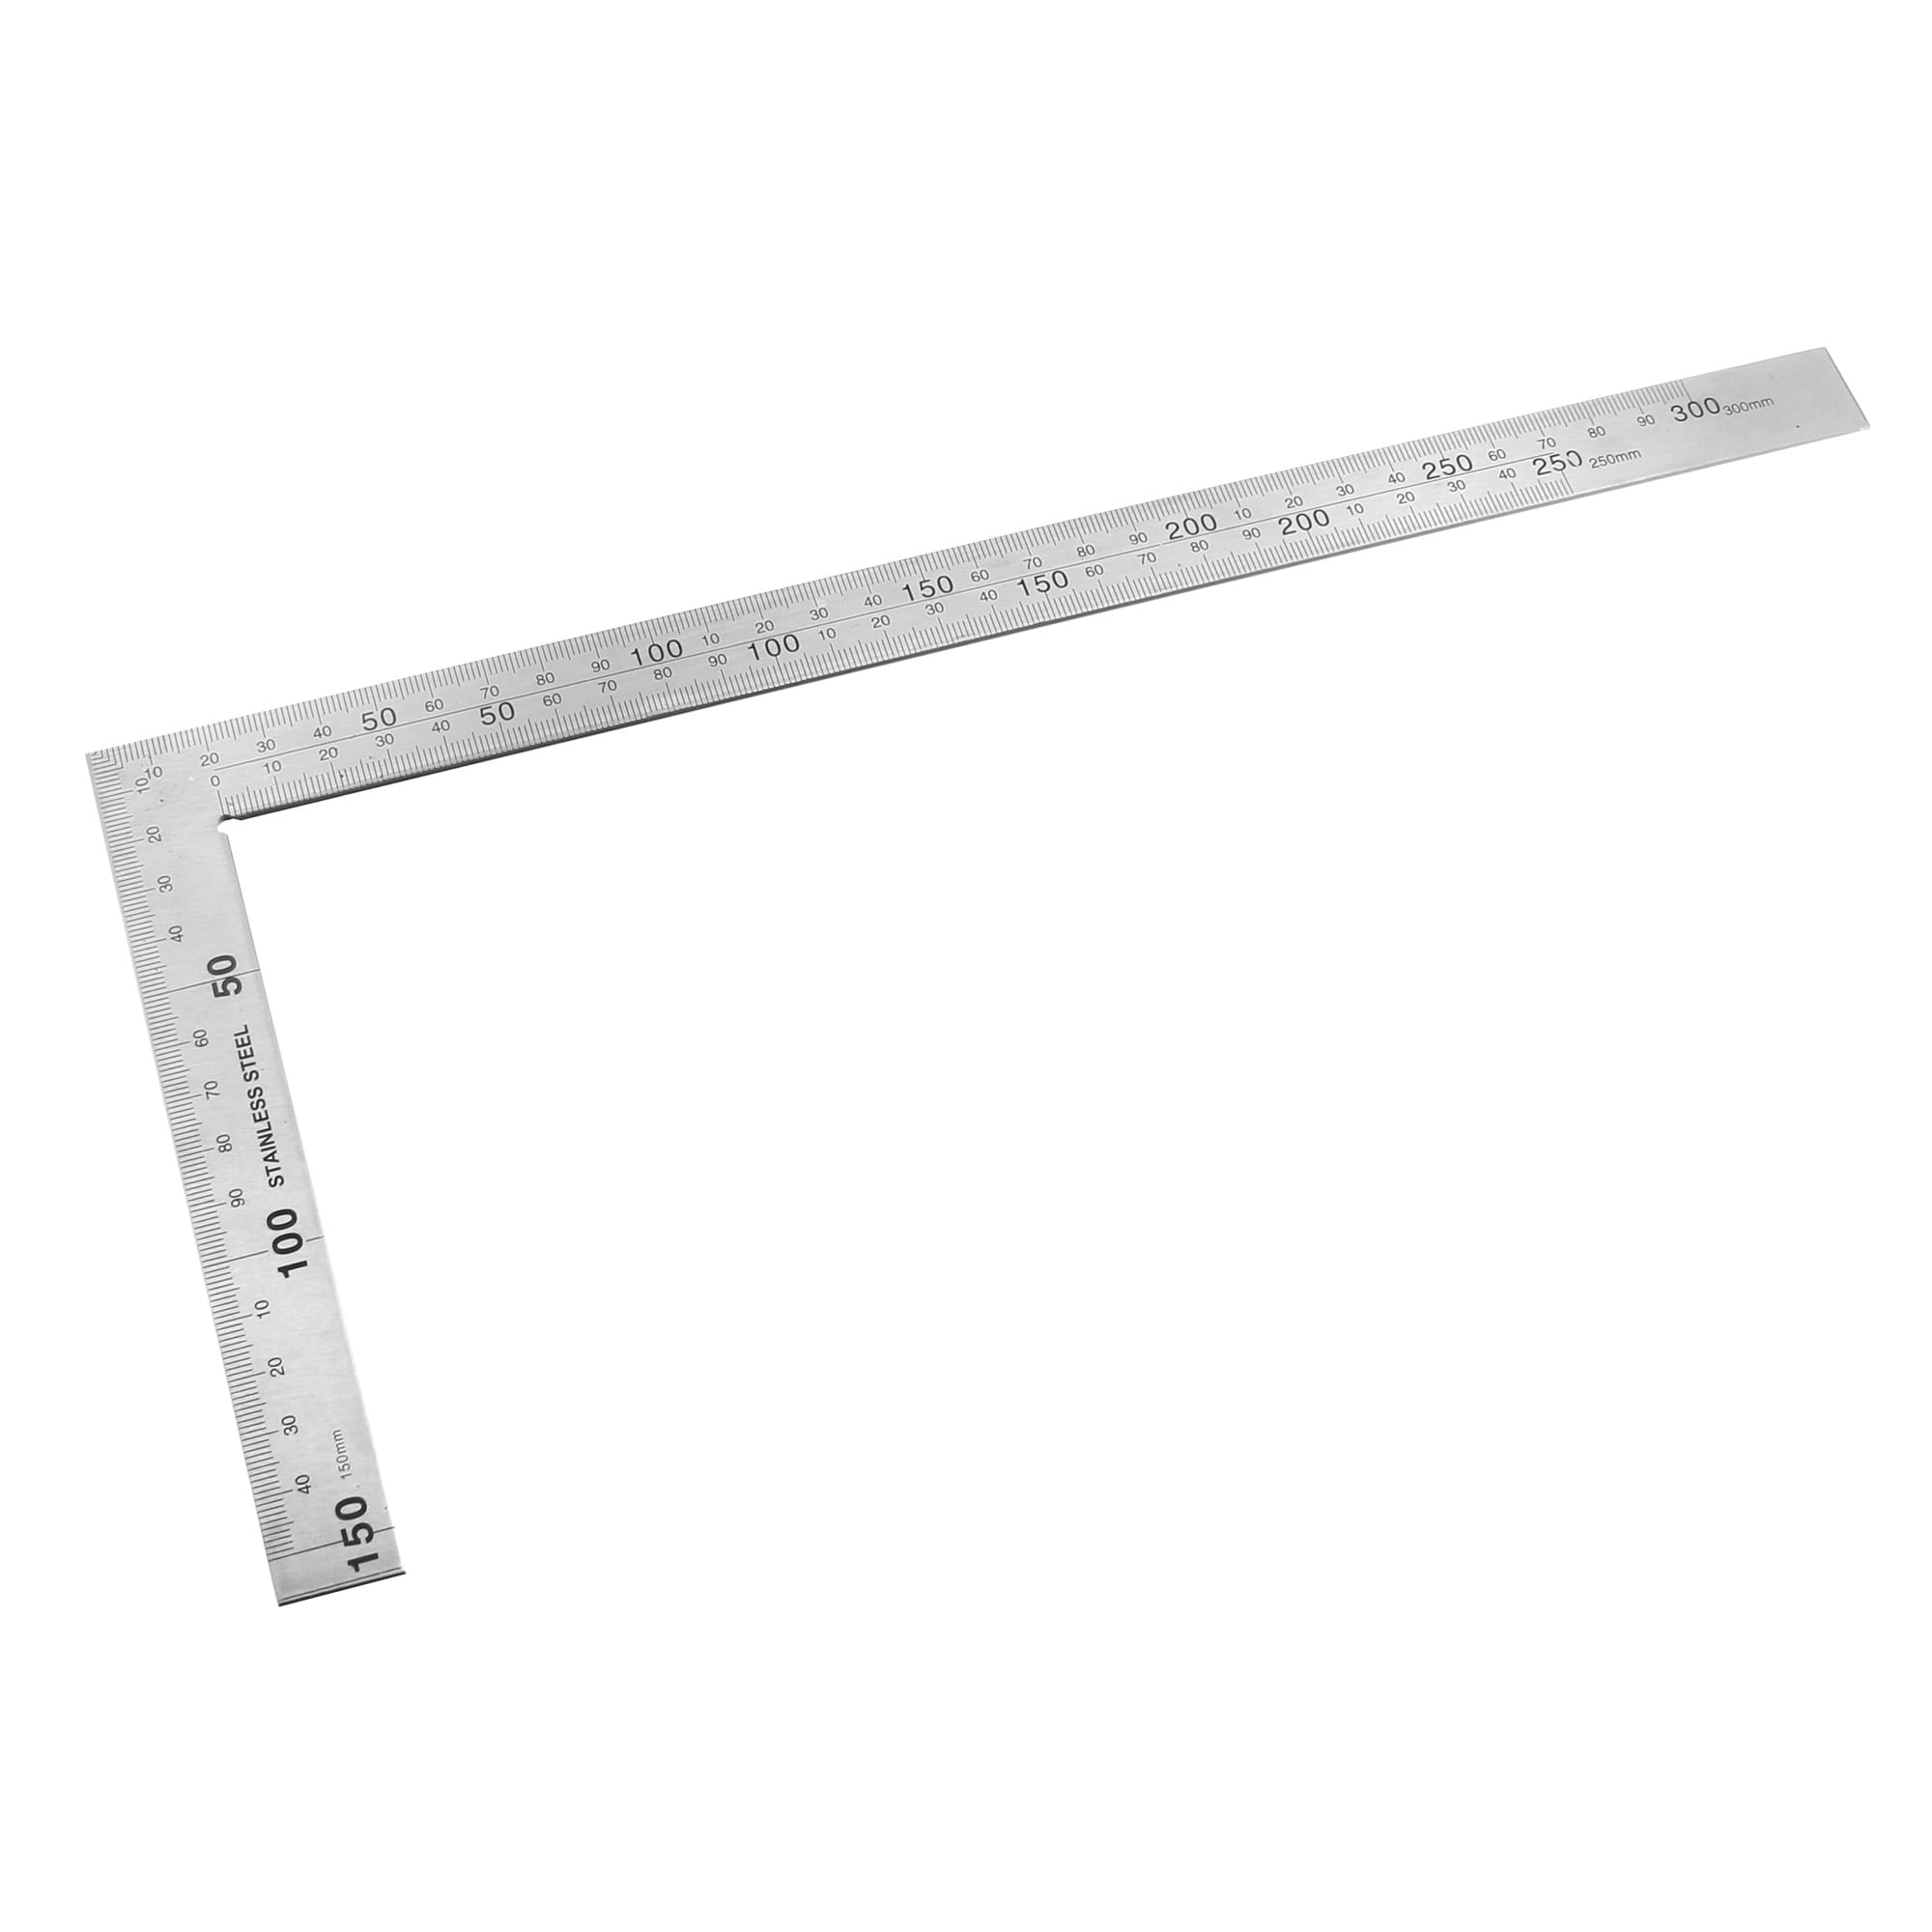 uxcell L Square 200x300mm Steel Metric 90 Degree Dual Side Angle Ruler MeasuringTool for Carpenter Engineer Black 